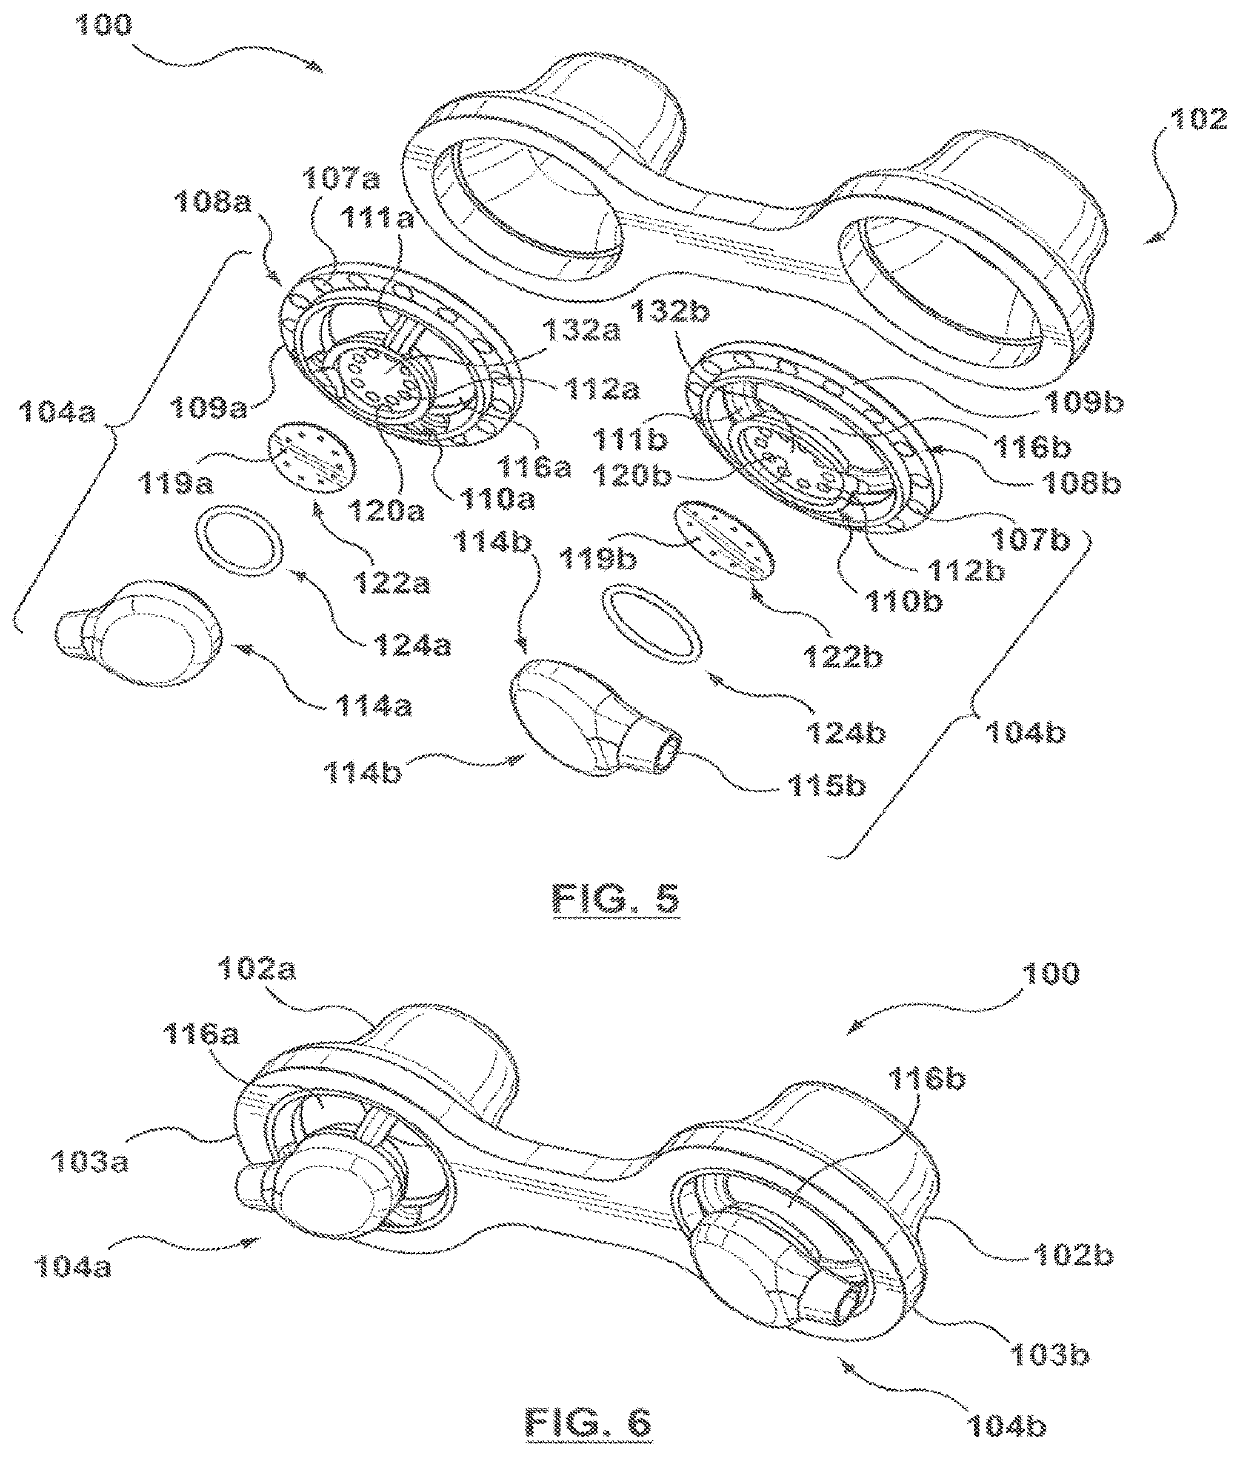 Nasal interface apparatus and systems for use with a respiratory assist device